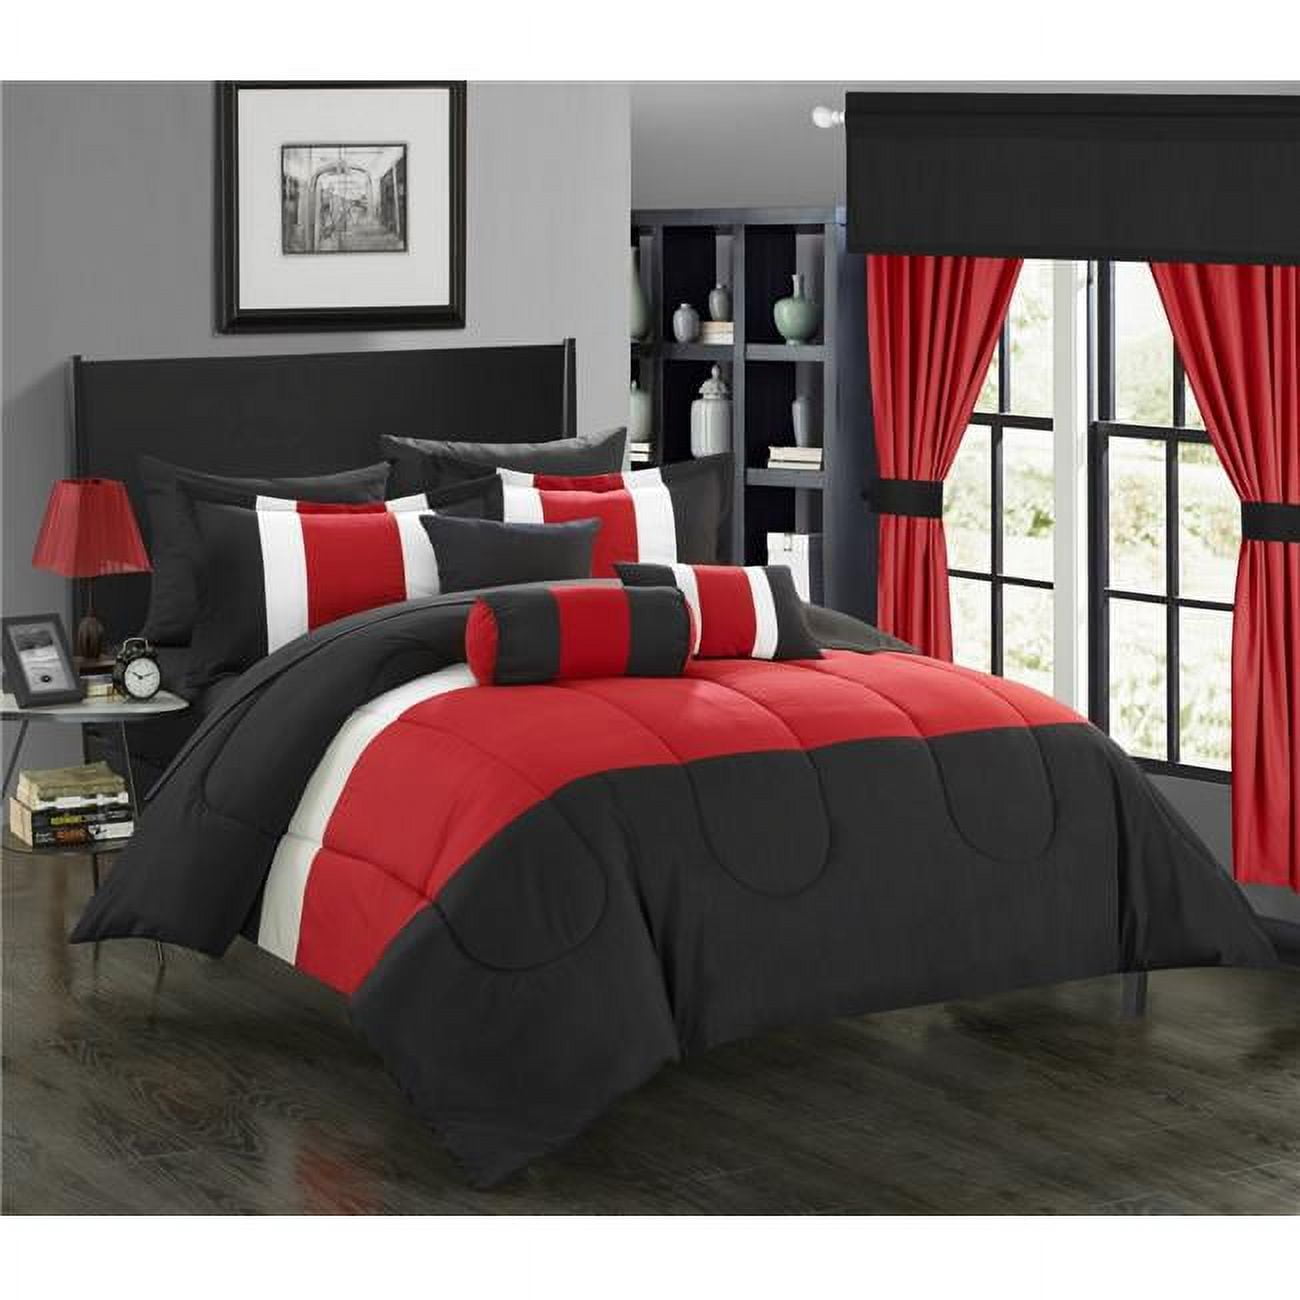 20 Piece Standon Complete Pieced Color Block Bedding, Sheets, Window Panel Collection King Bed In A Bag Comforter Set, Red Sheets